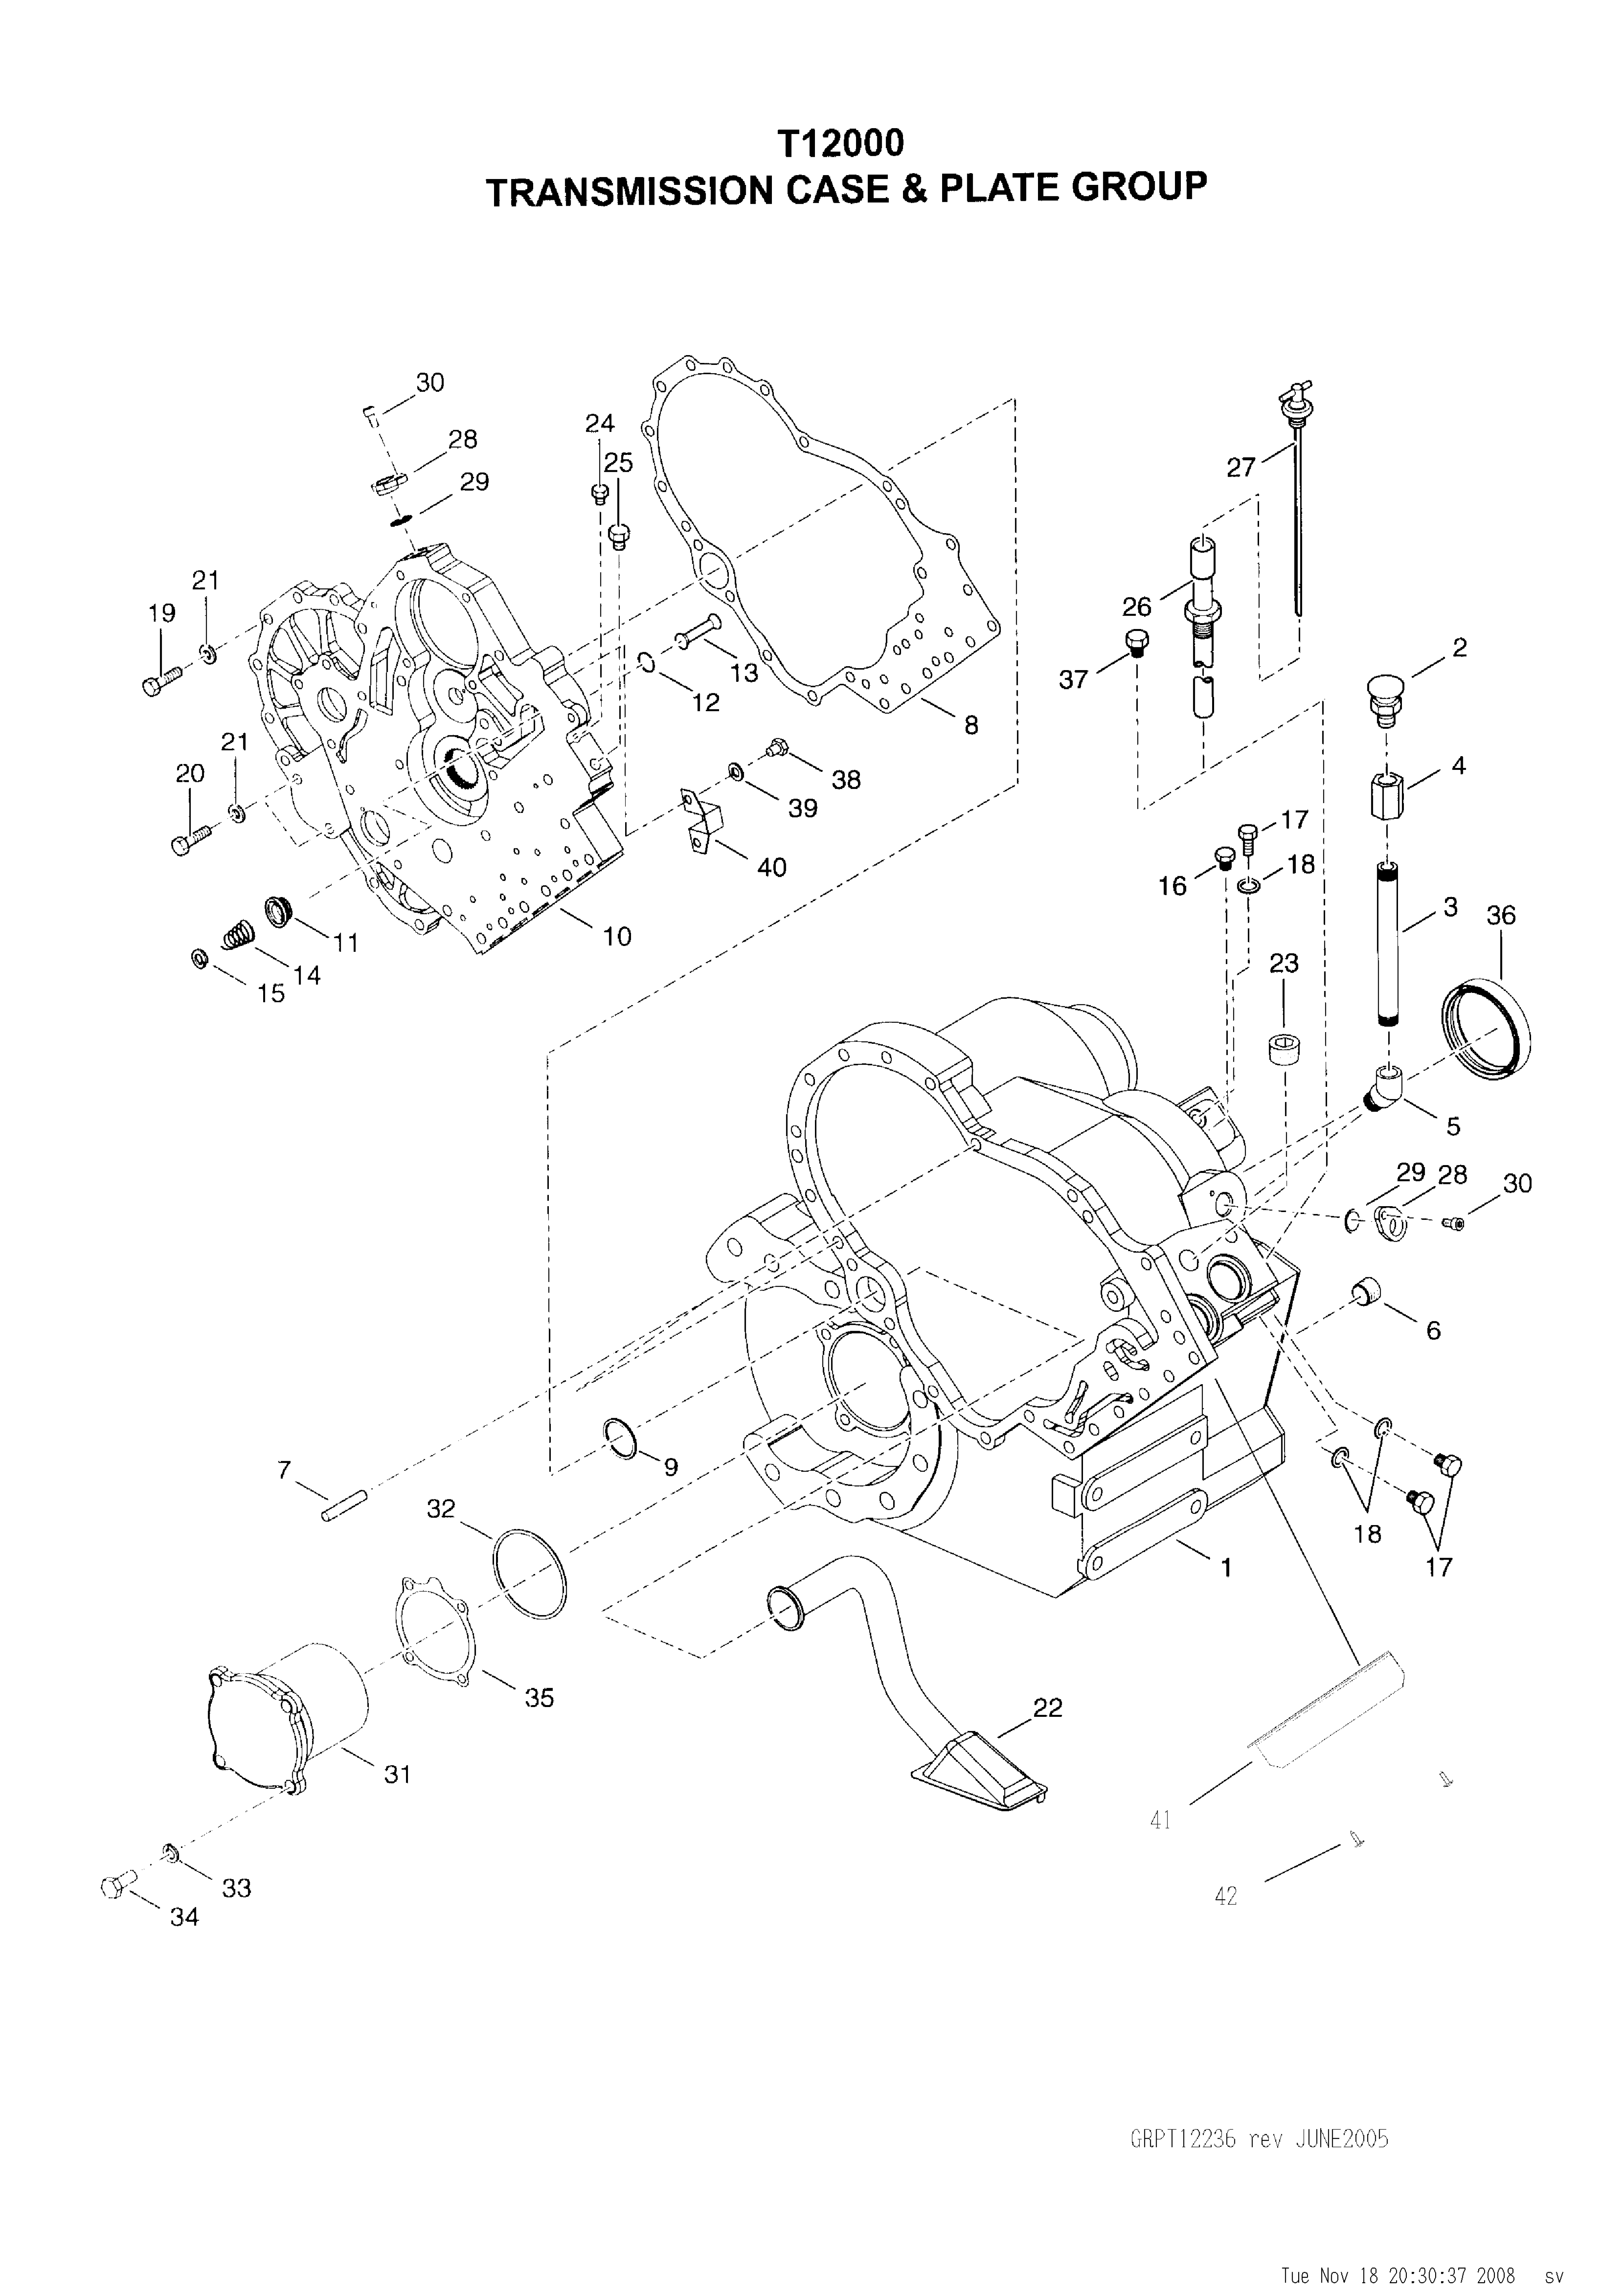 drawing for SWINGMASTER 8700031 - SPRING (figure 5)